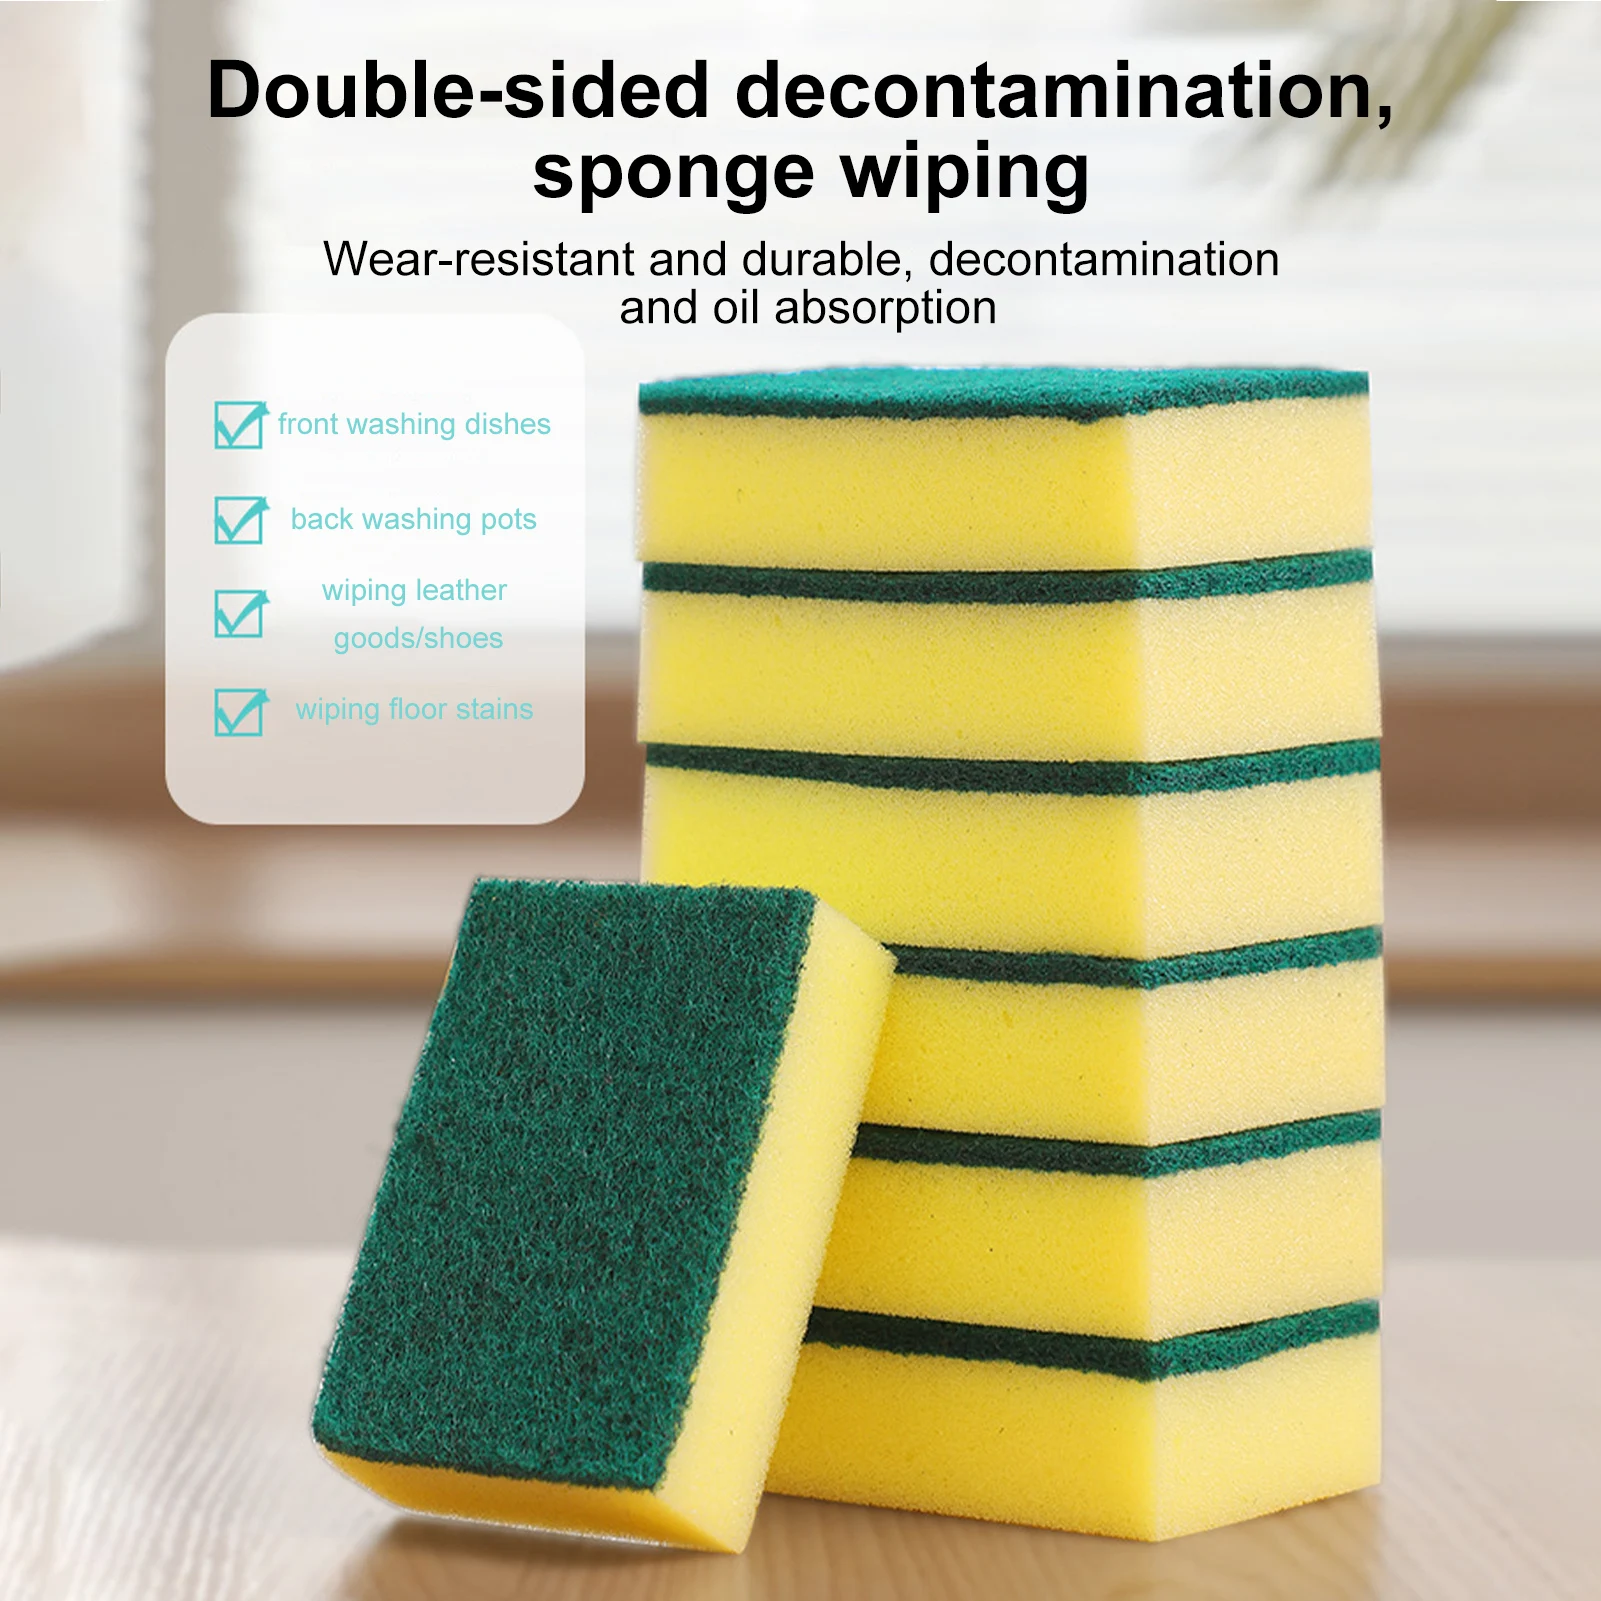 https://ae01.alicdn.com/kf/S3c2be3a23f31436c9c65e3187d9d0cf6l/Kitchen-Cleaning-Sponge-Dual-Sided-Dish-washing-Sponge-For-Kitchen-Heavy-Duty-Kitchen-Sponges-And-Scrubbers.jpg